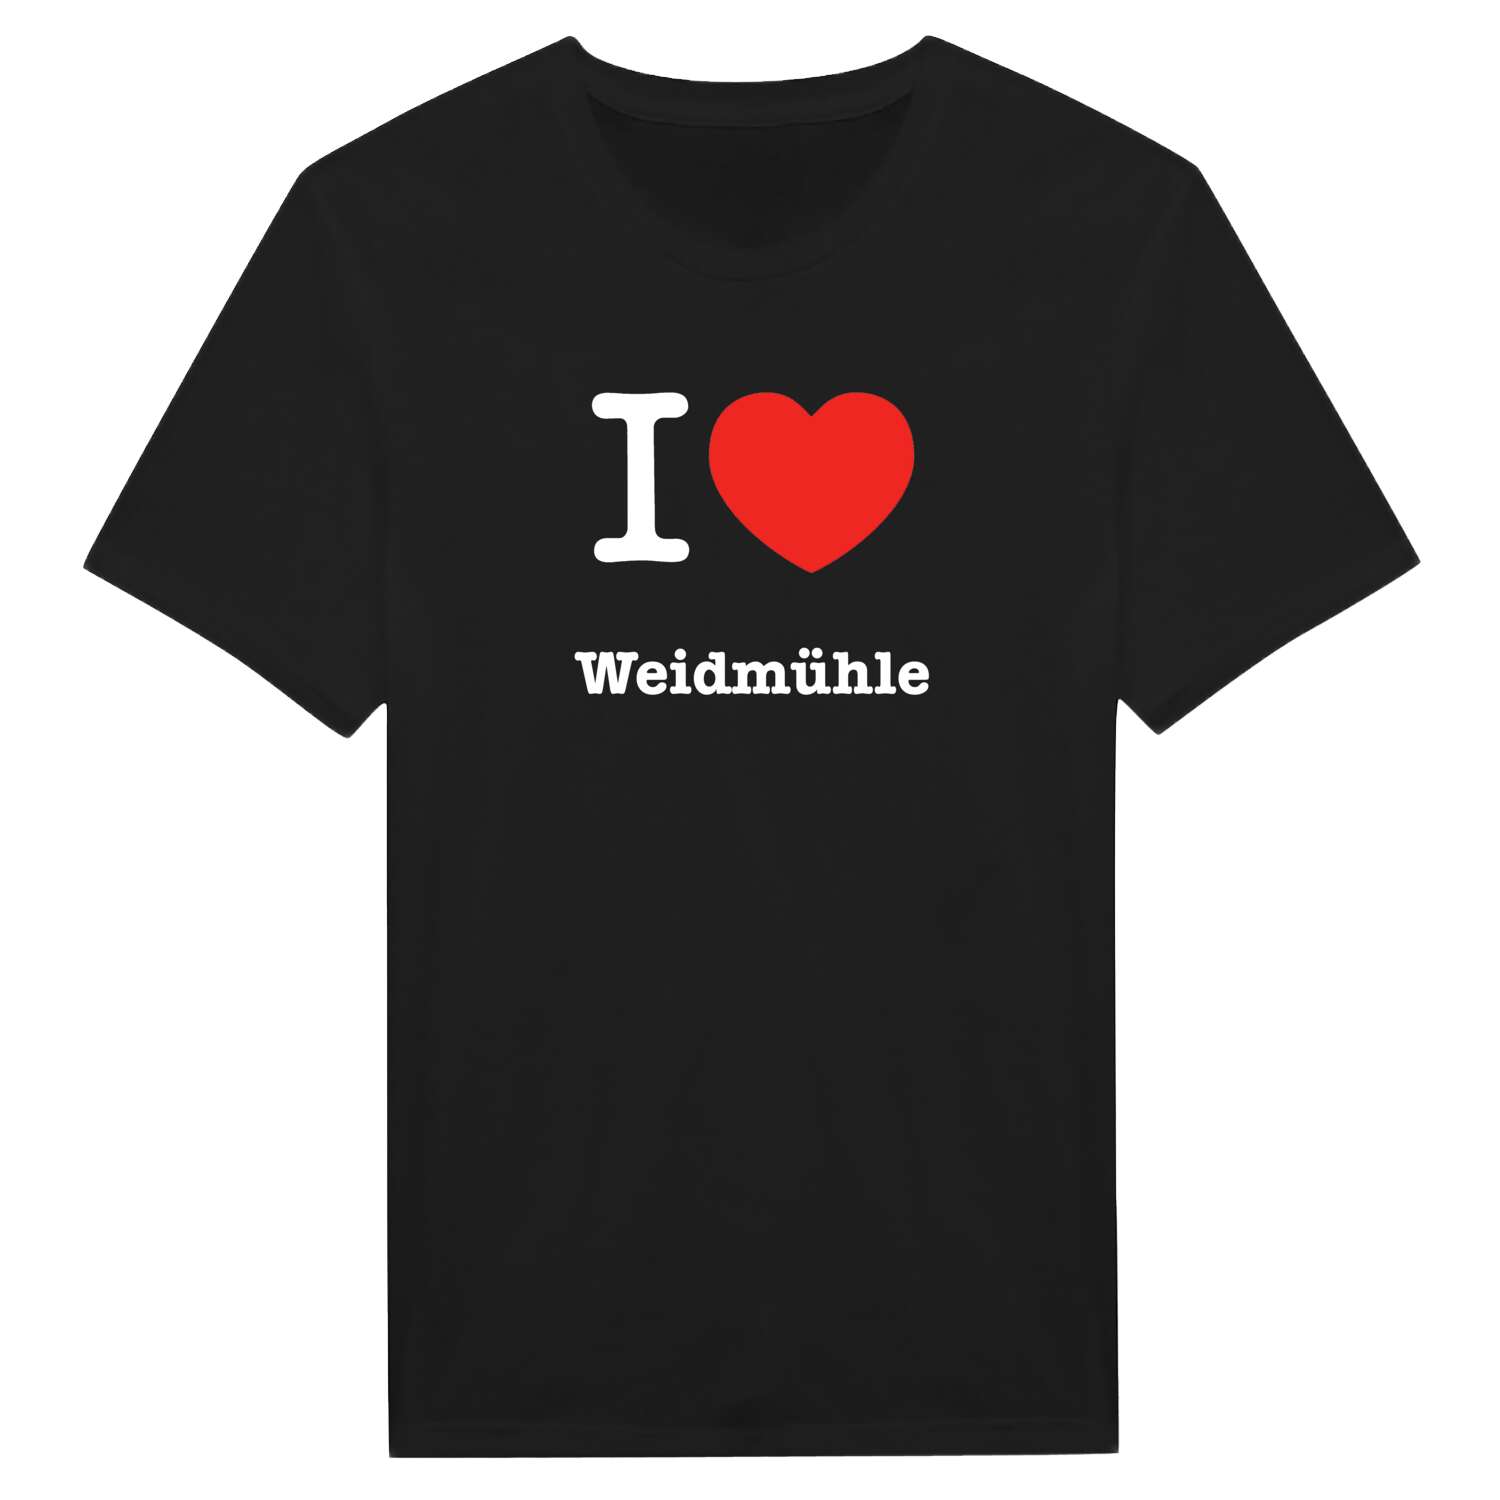 Weidmühle T-Shirt »I love«